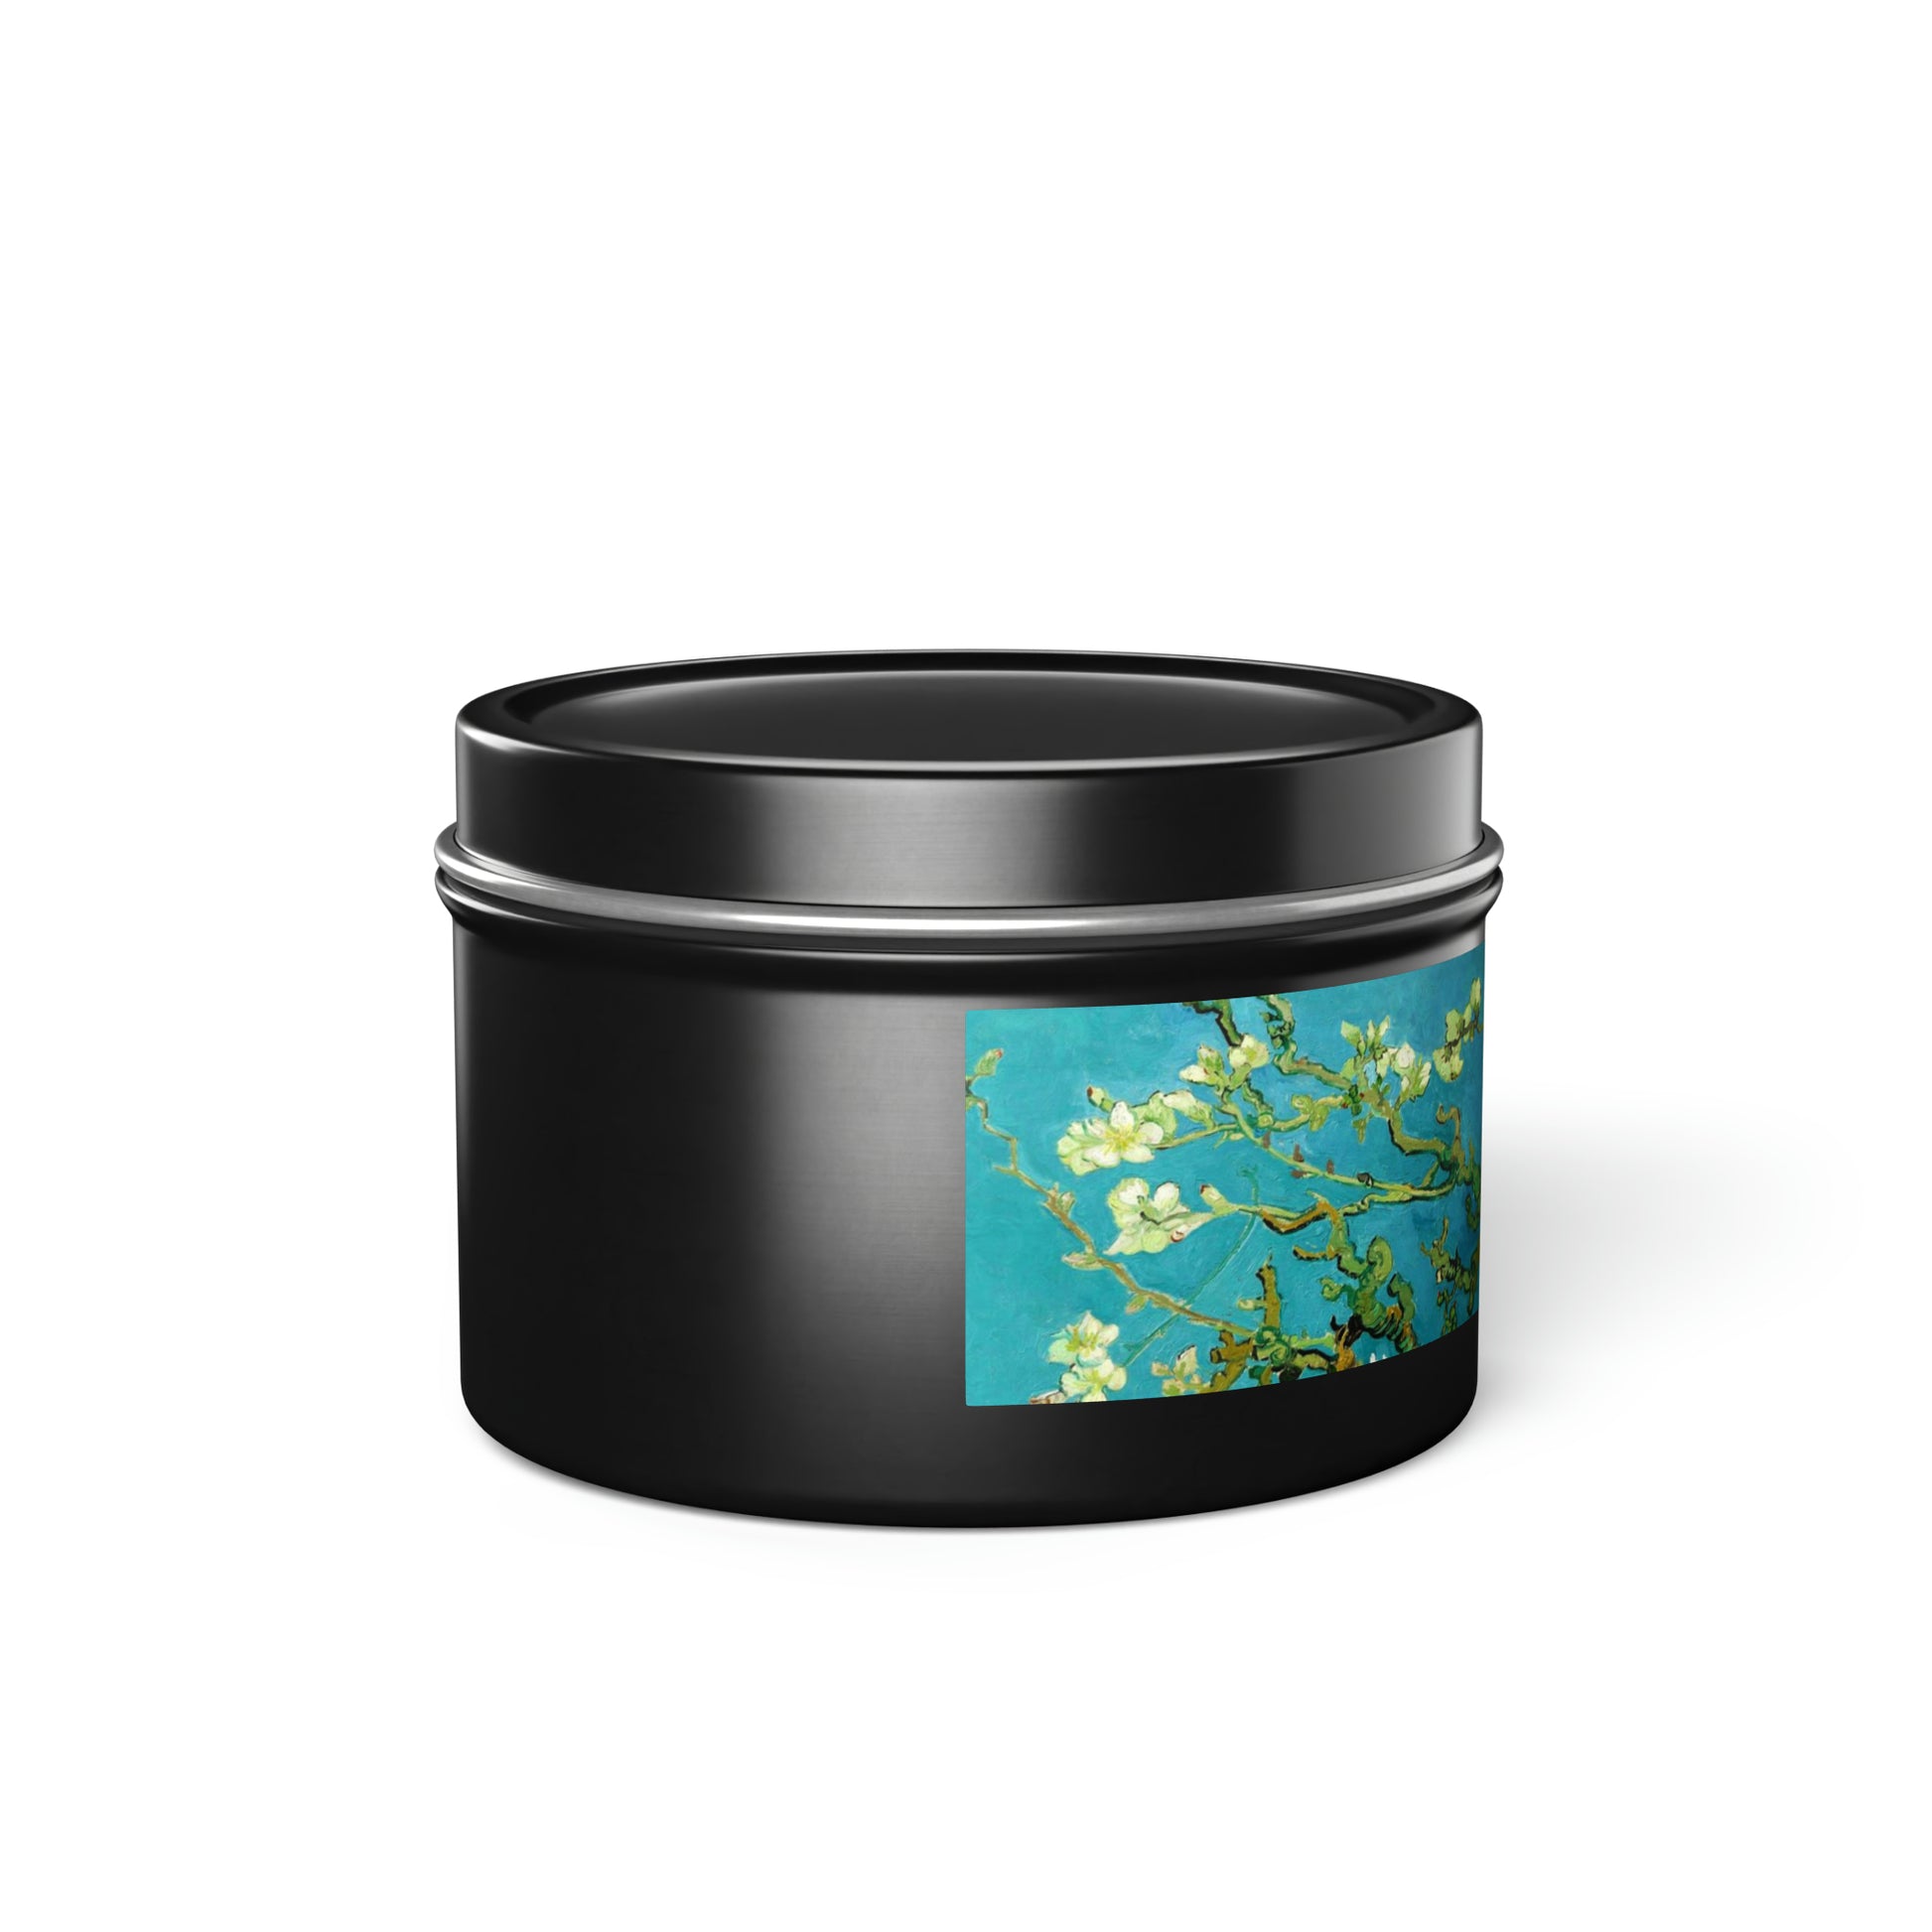 a black container with a picture of a flower on it